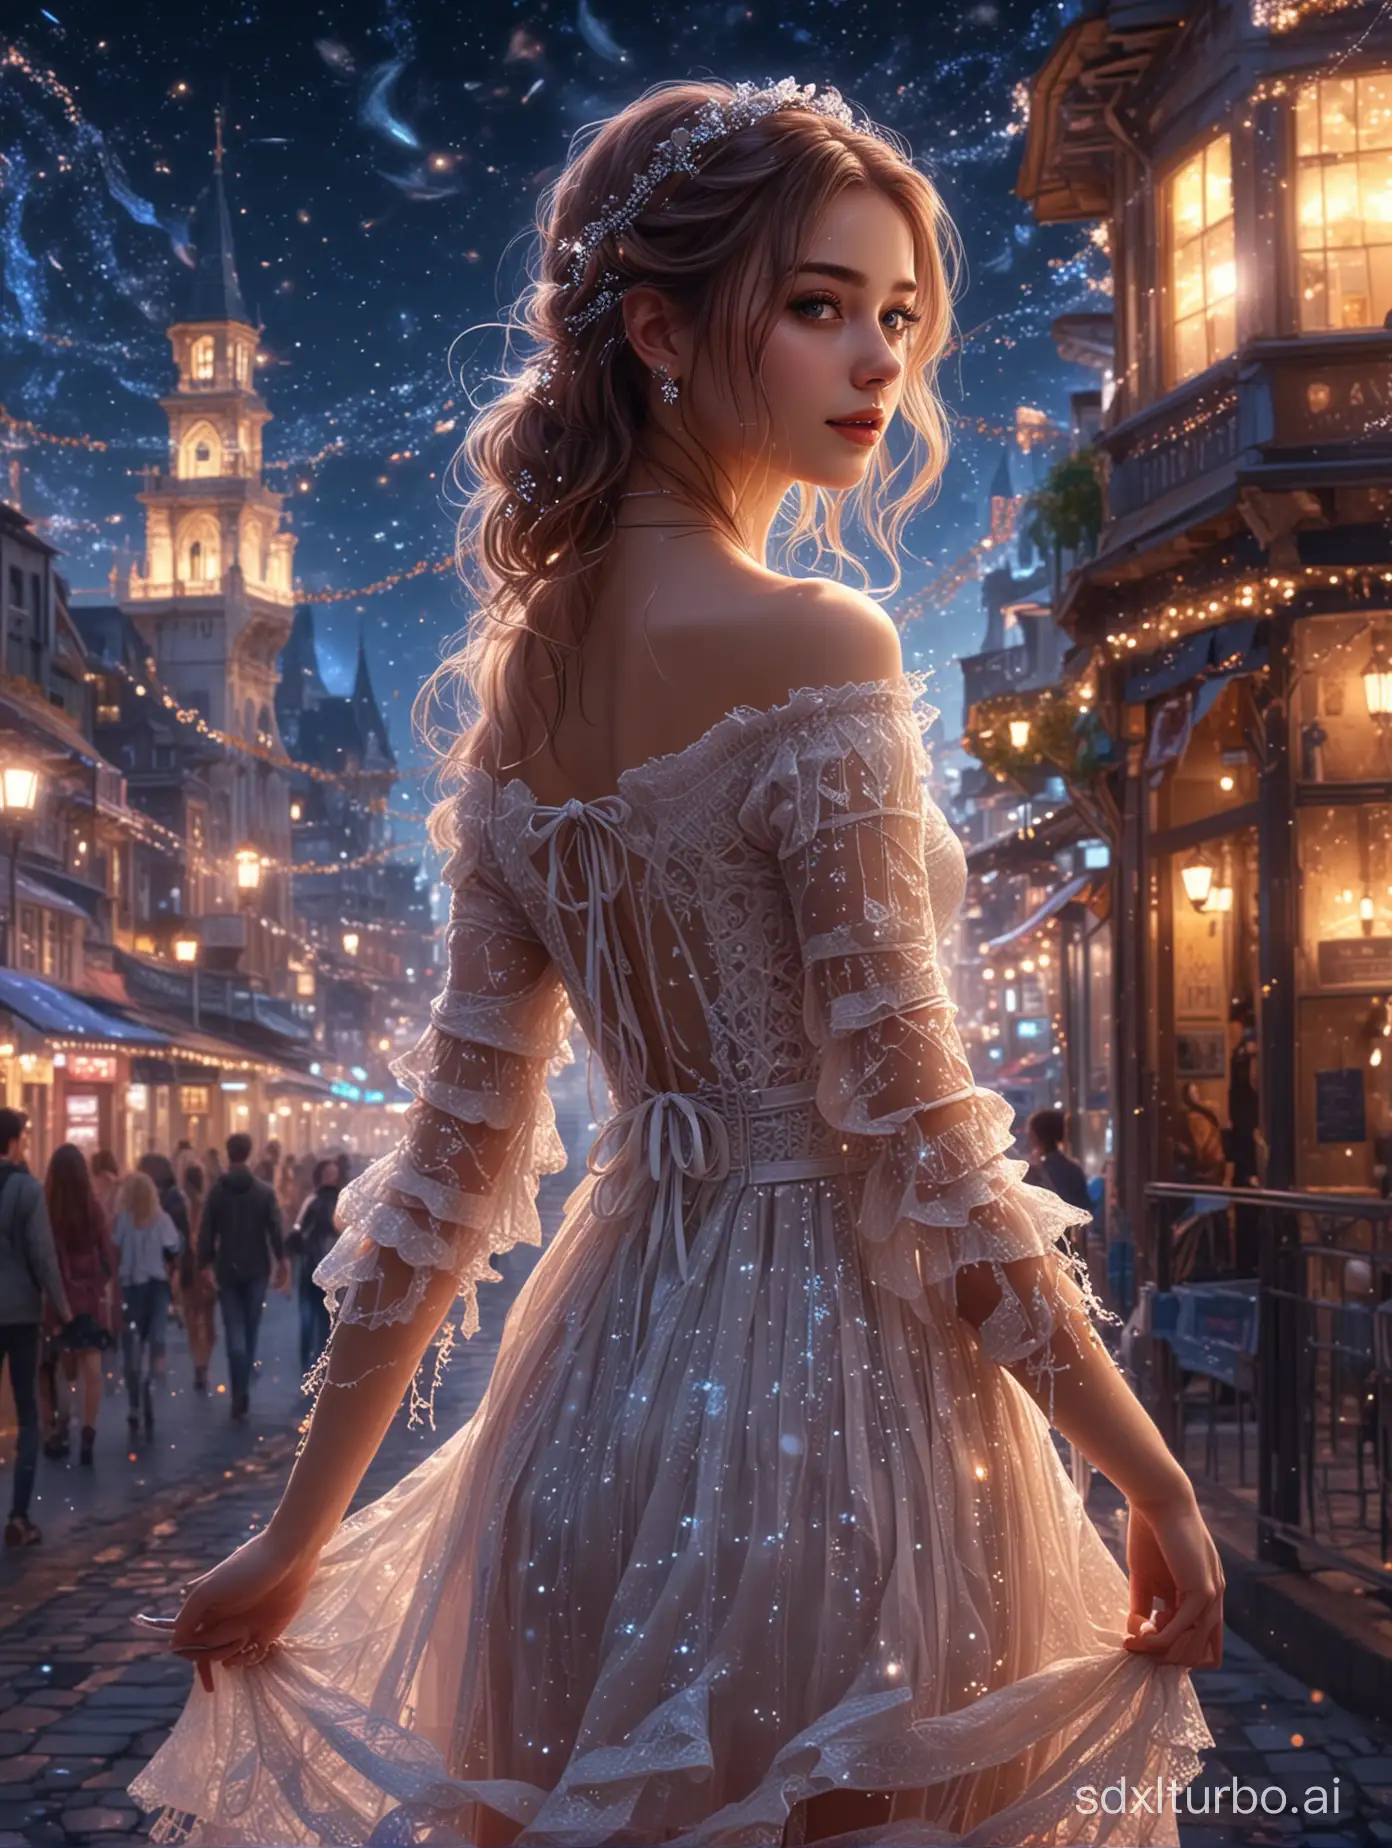 Fantasy-Space-City-with-Glittering-Illumination-Precise-Drawing-of-a-20YearOld-Girl-in-Pretty-Lace-Dress